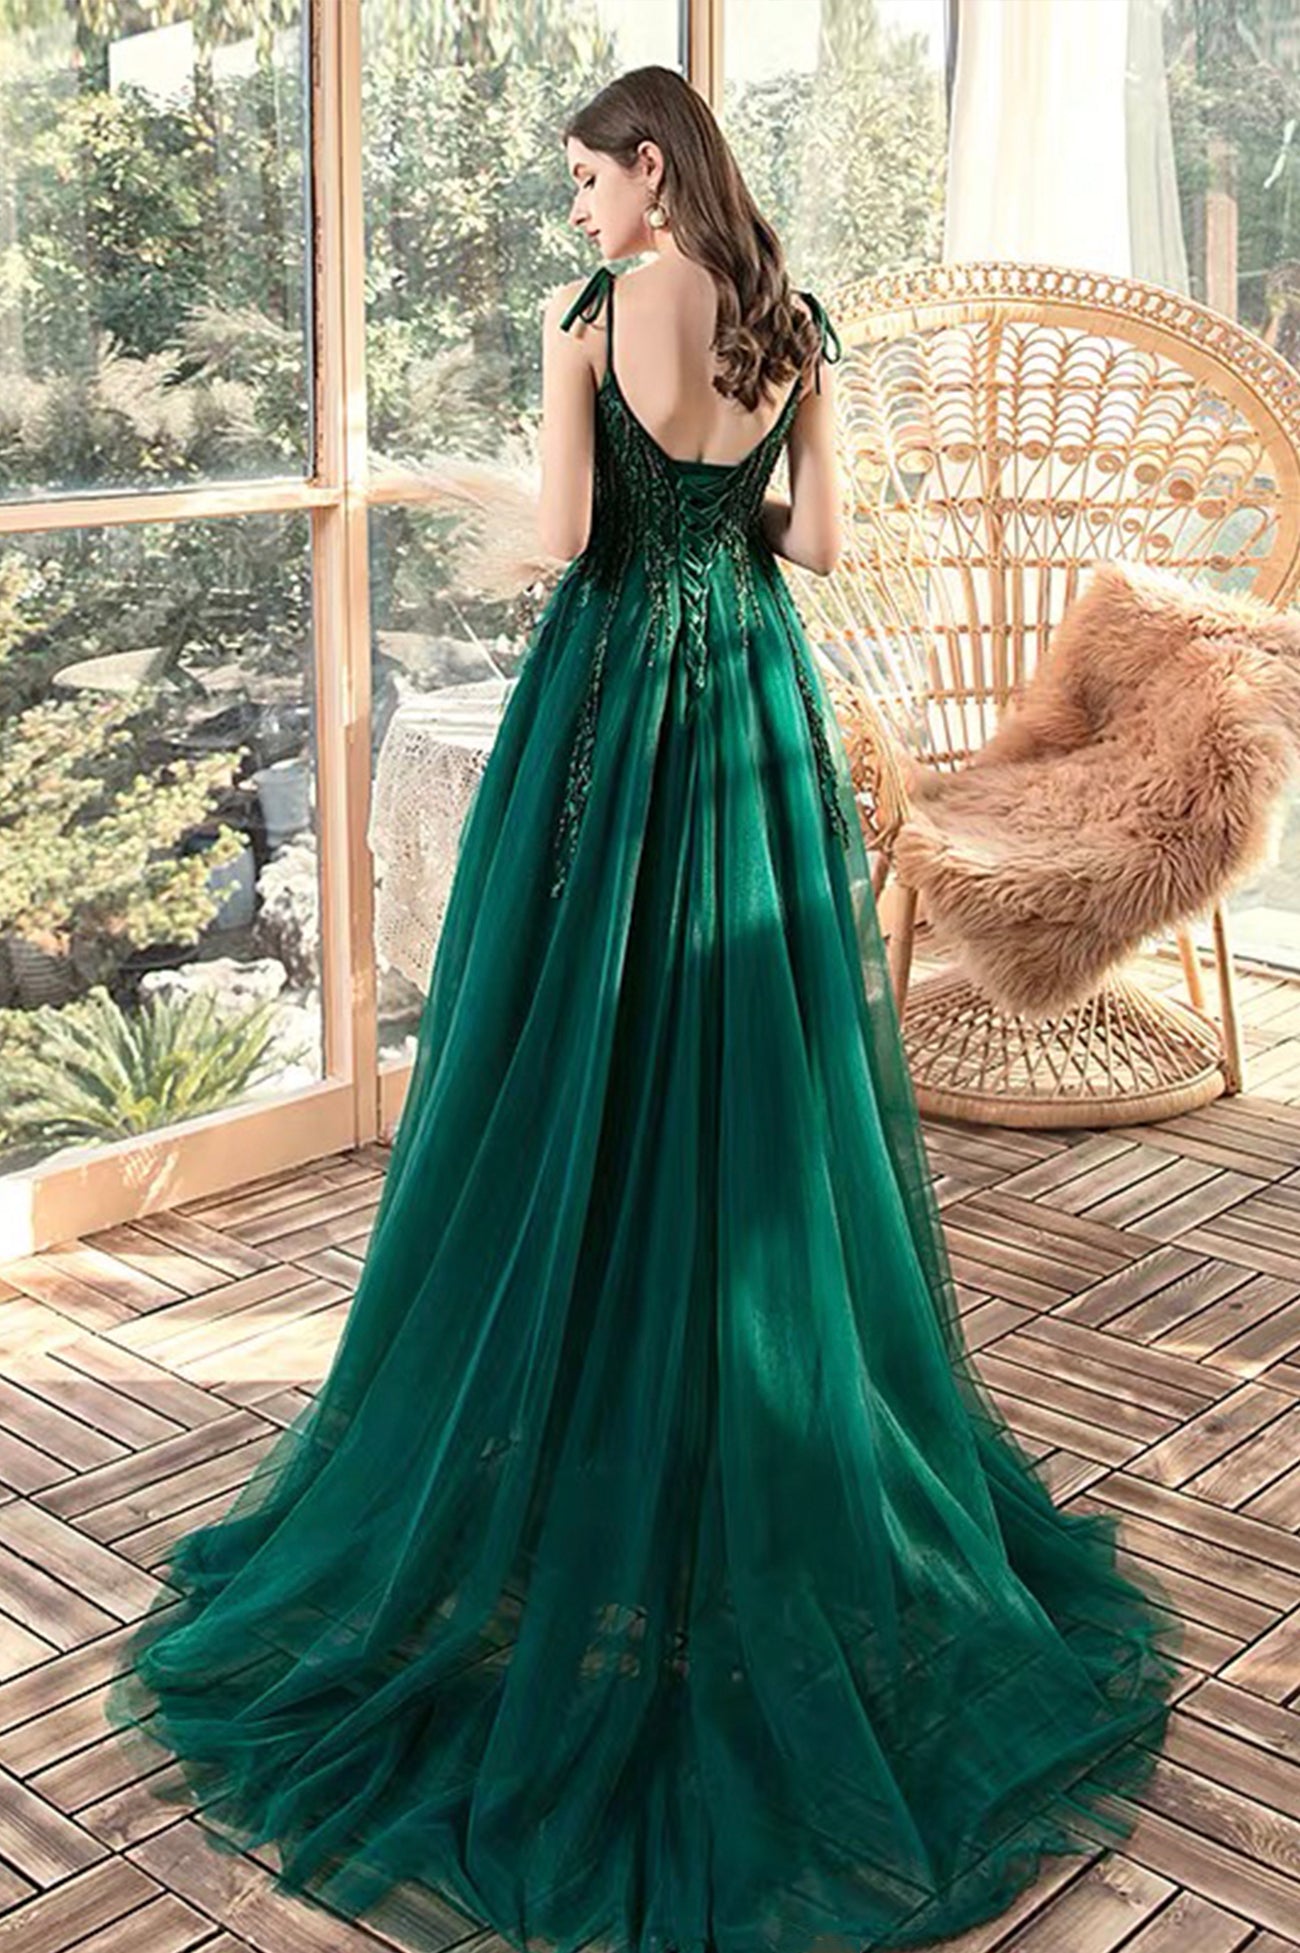 32 Hottest Prom Dress Ideas That'll Make You Swoon : Emerald Green Prom  Dress